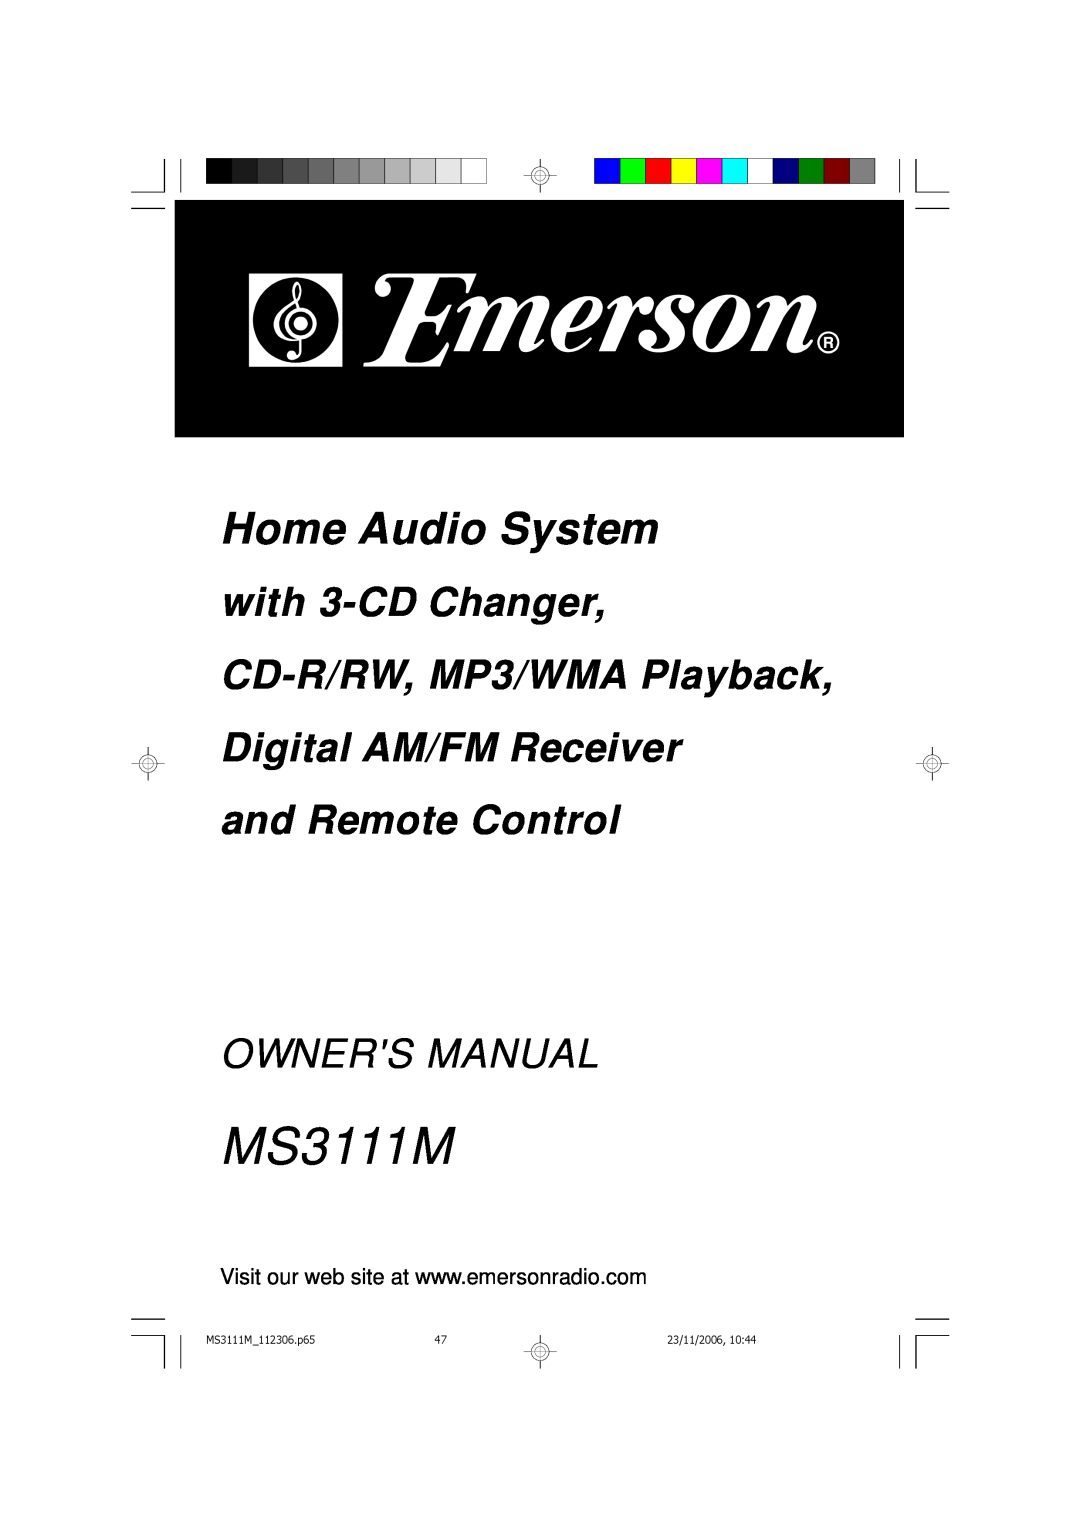 Emerson owner manual Home Audio System, with 3-CDChanger CD-R/RW,MP3/WMA Playback, MS3111M 112306.p65, 23/11/2006 